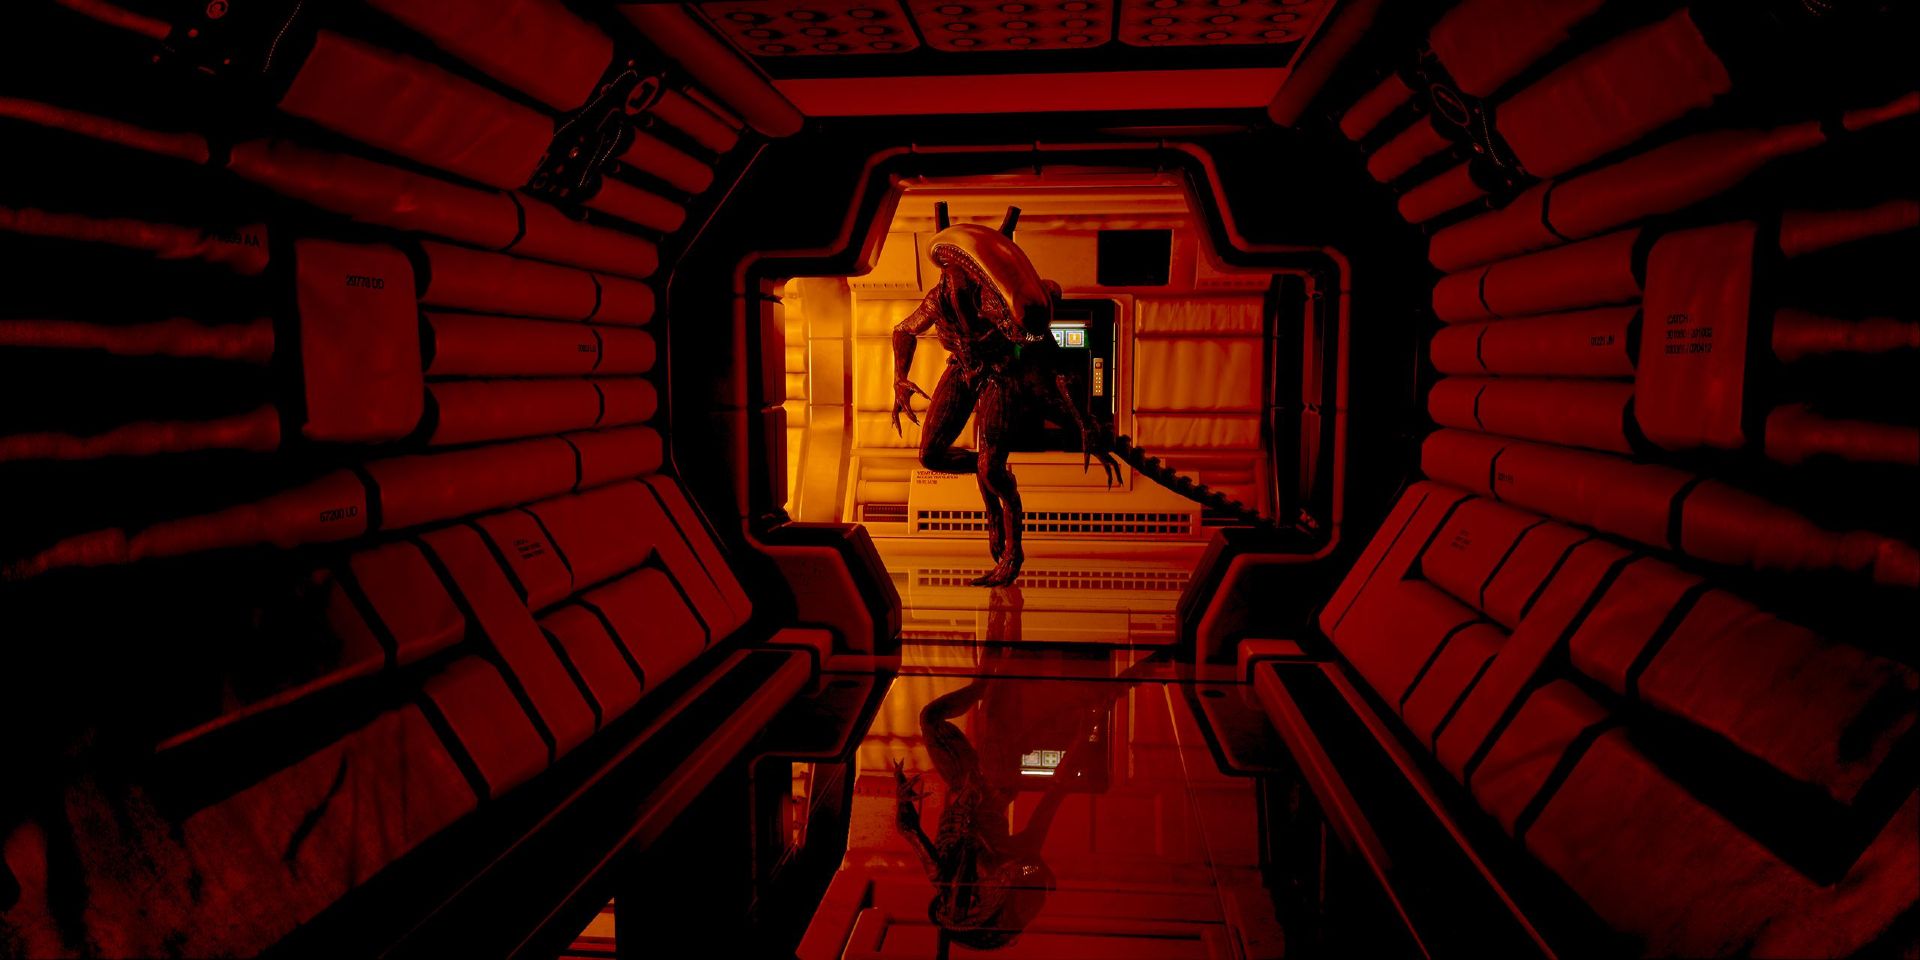 A xenomorph in the video game Alien Isolation.